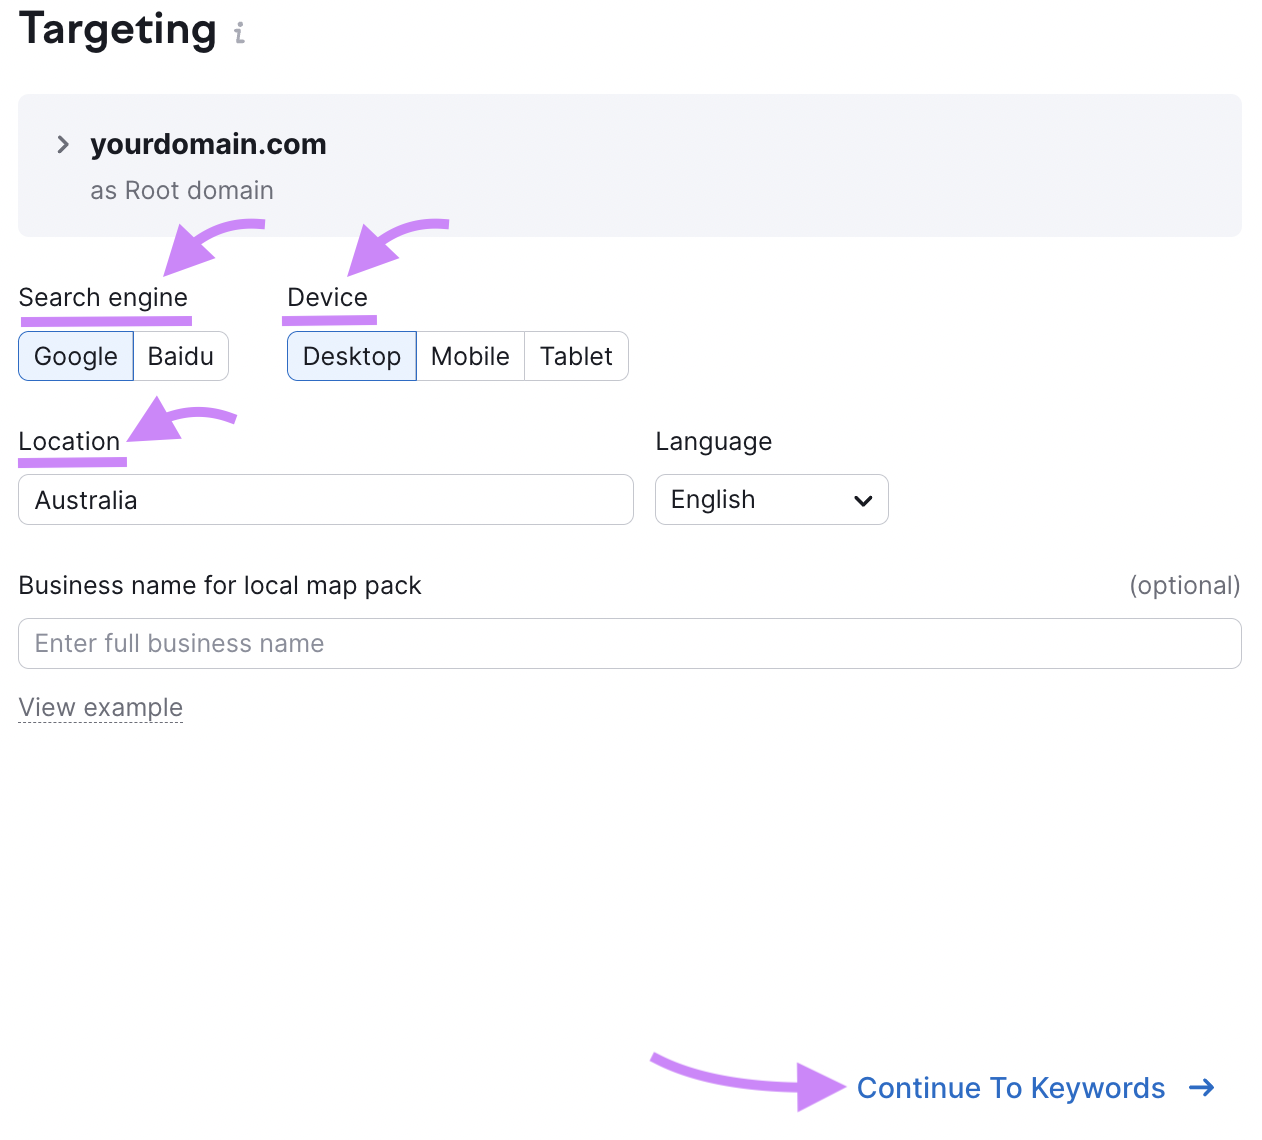 "Targeting" section in Position Tracking tool configuration